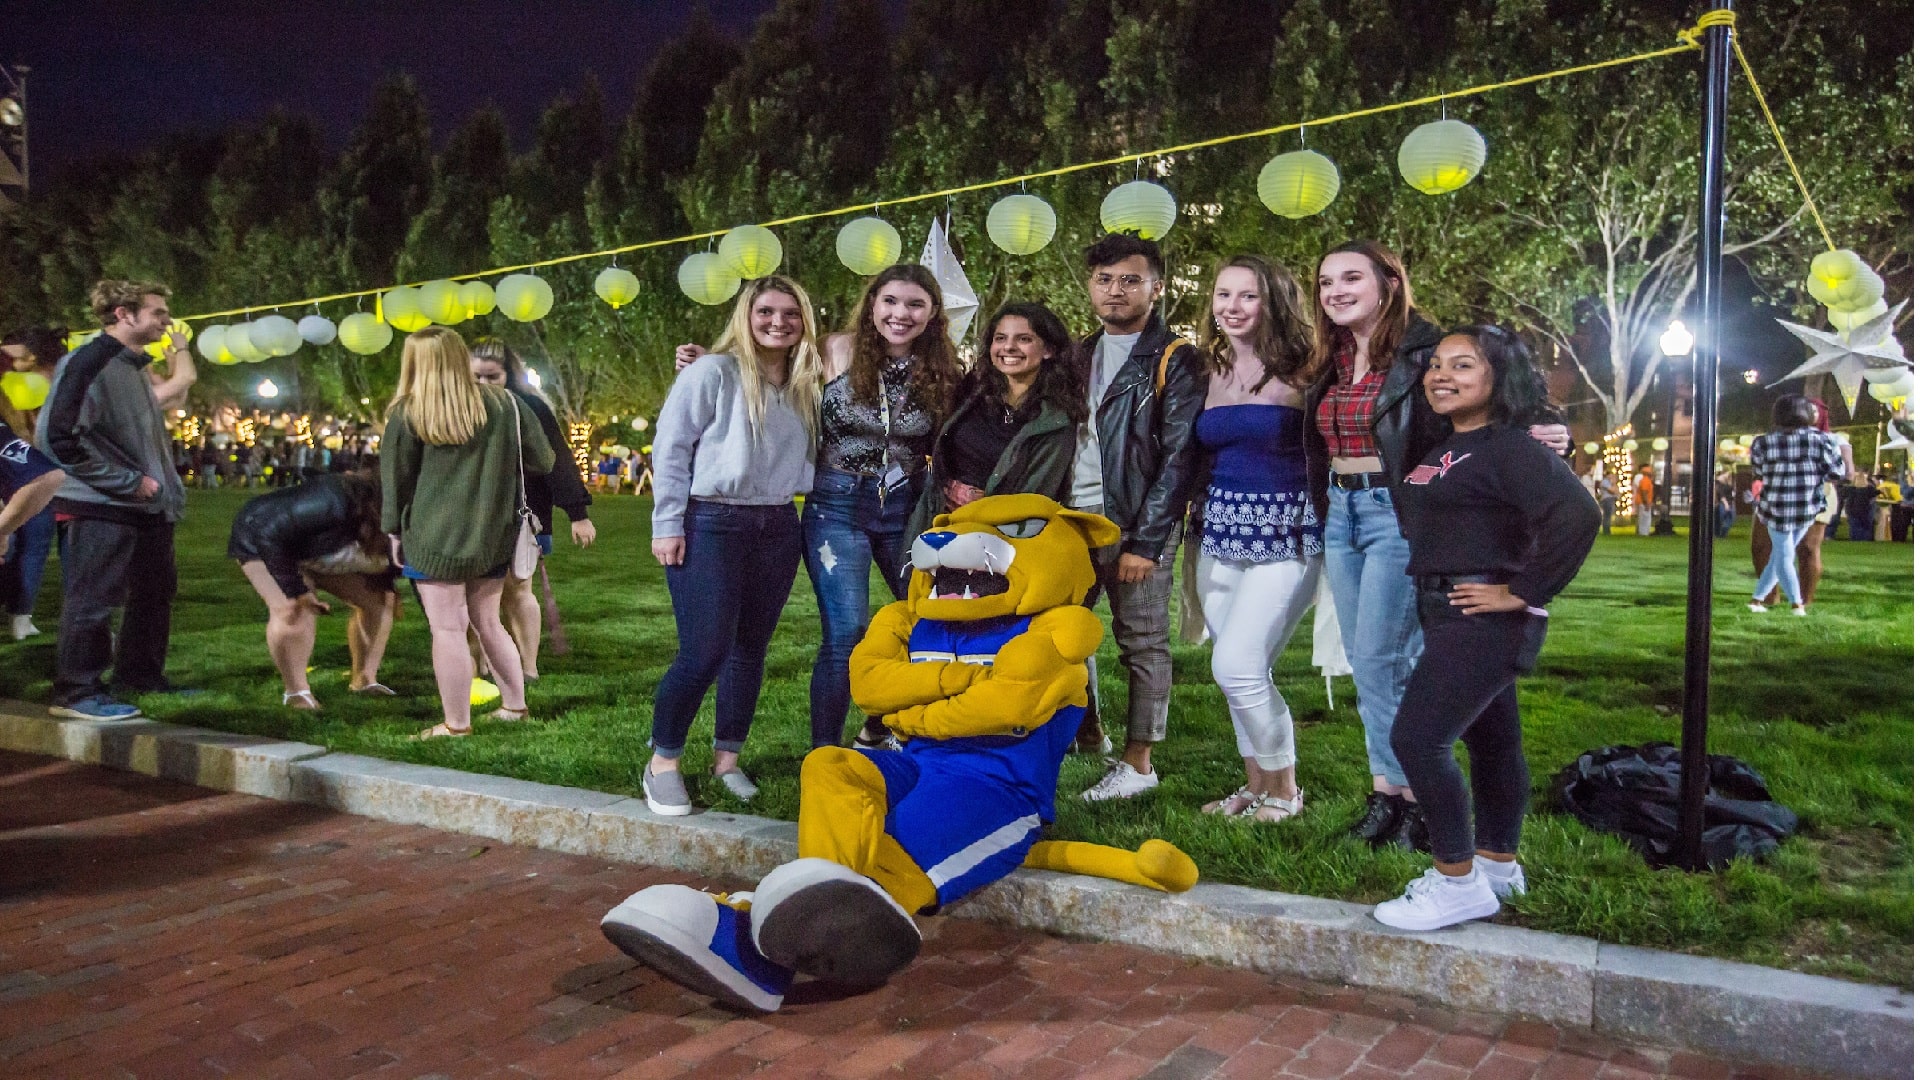 a group picture with students and JWU mascot Willie at Ignite the Night 